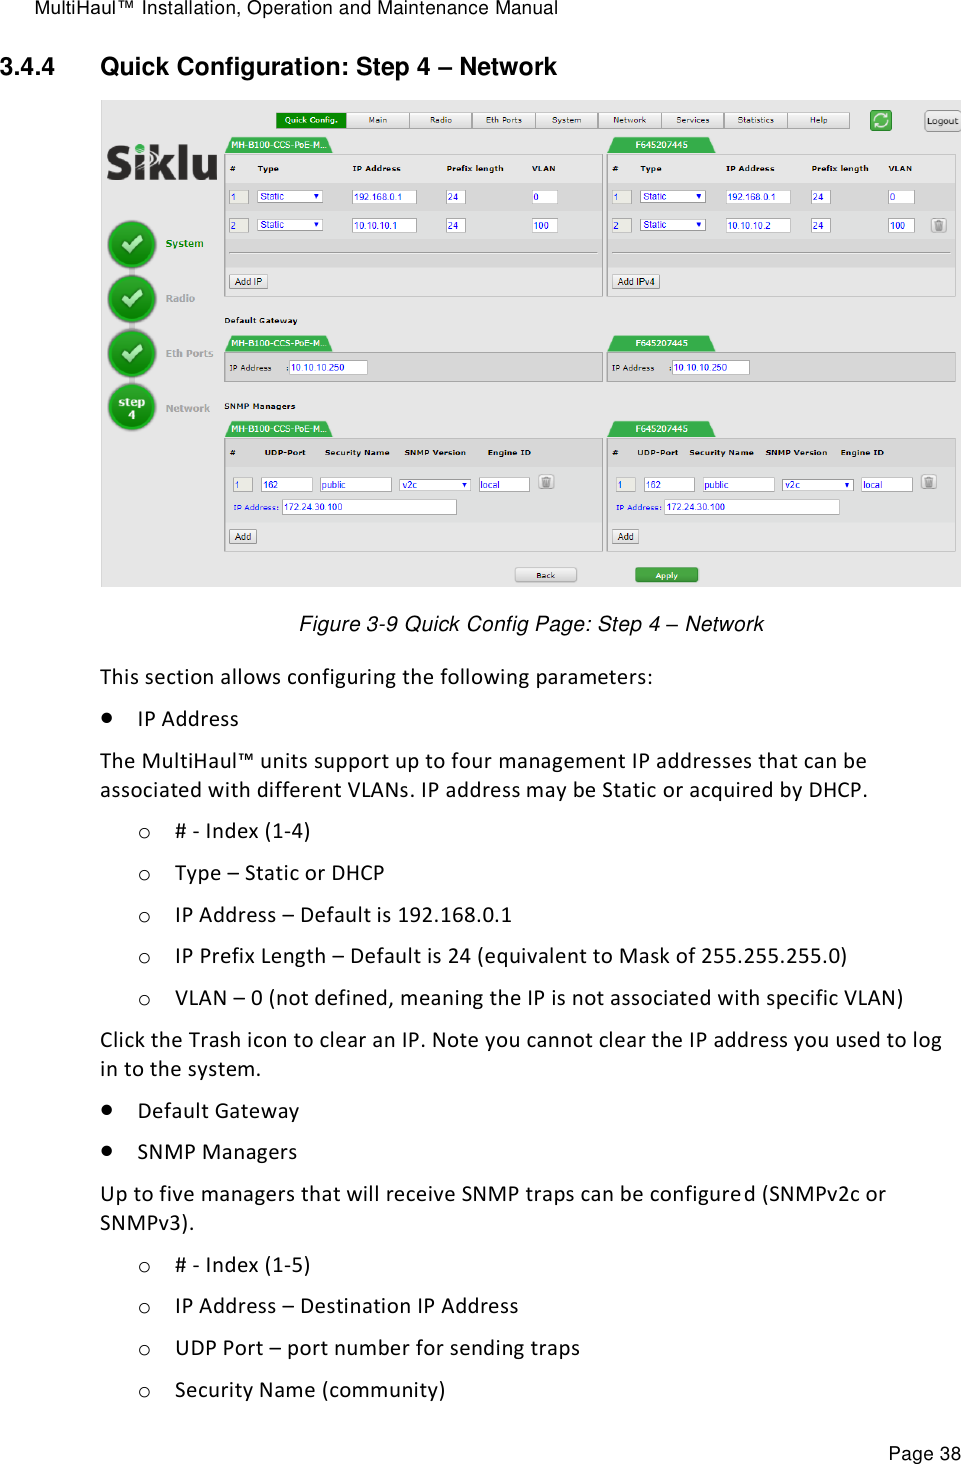 MultiHaul™ Installation, Operation and Maintenance Manual Page 38 3.4.4  Quick Configuration: Step 4 – Network  Figure 3-9 Quick Config Page: Step 4 – Network This section allows configuring the following parameters:  IP Address The MultiHaul™ units support up to four management IP addresses that can be associated with different VLANs. IP address may be Static or acquired by DHCP. o # - Index (1-4) o Type – Static or DHCP o IP Address – Default is 192.168.0.1 o IP Prefix Length – Default is 24 (equivalent to Mask of 255.255.255.0) o VLAN – 0 (not defined, meaning the IP is not associated with specific VLAN) Click the Trash icon to clear an IP. Note you cannot clear the IP address you used to log in to the system.  Default Gateway  SNMP Managers Up to five managers that will receive SNMP traps can be configured (SNMPv2c or SNMPv3). o # - Index (1-5) o IP Address – Destination IP Address o UDP Port – port number for sending traps o Security Name (community) 